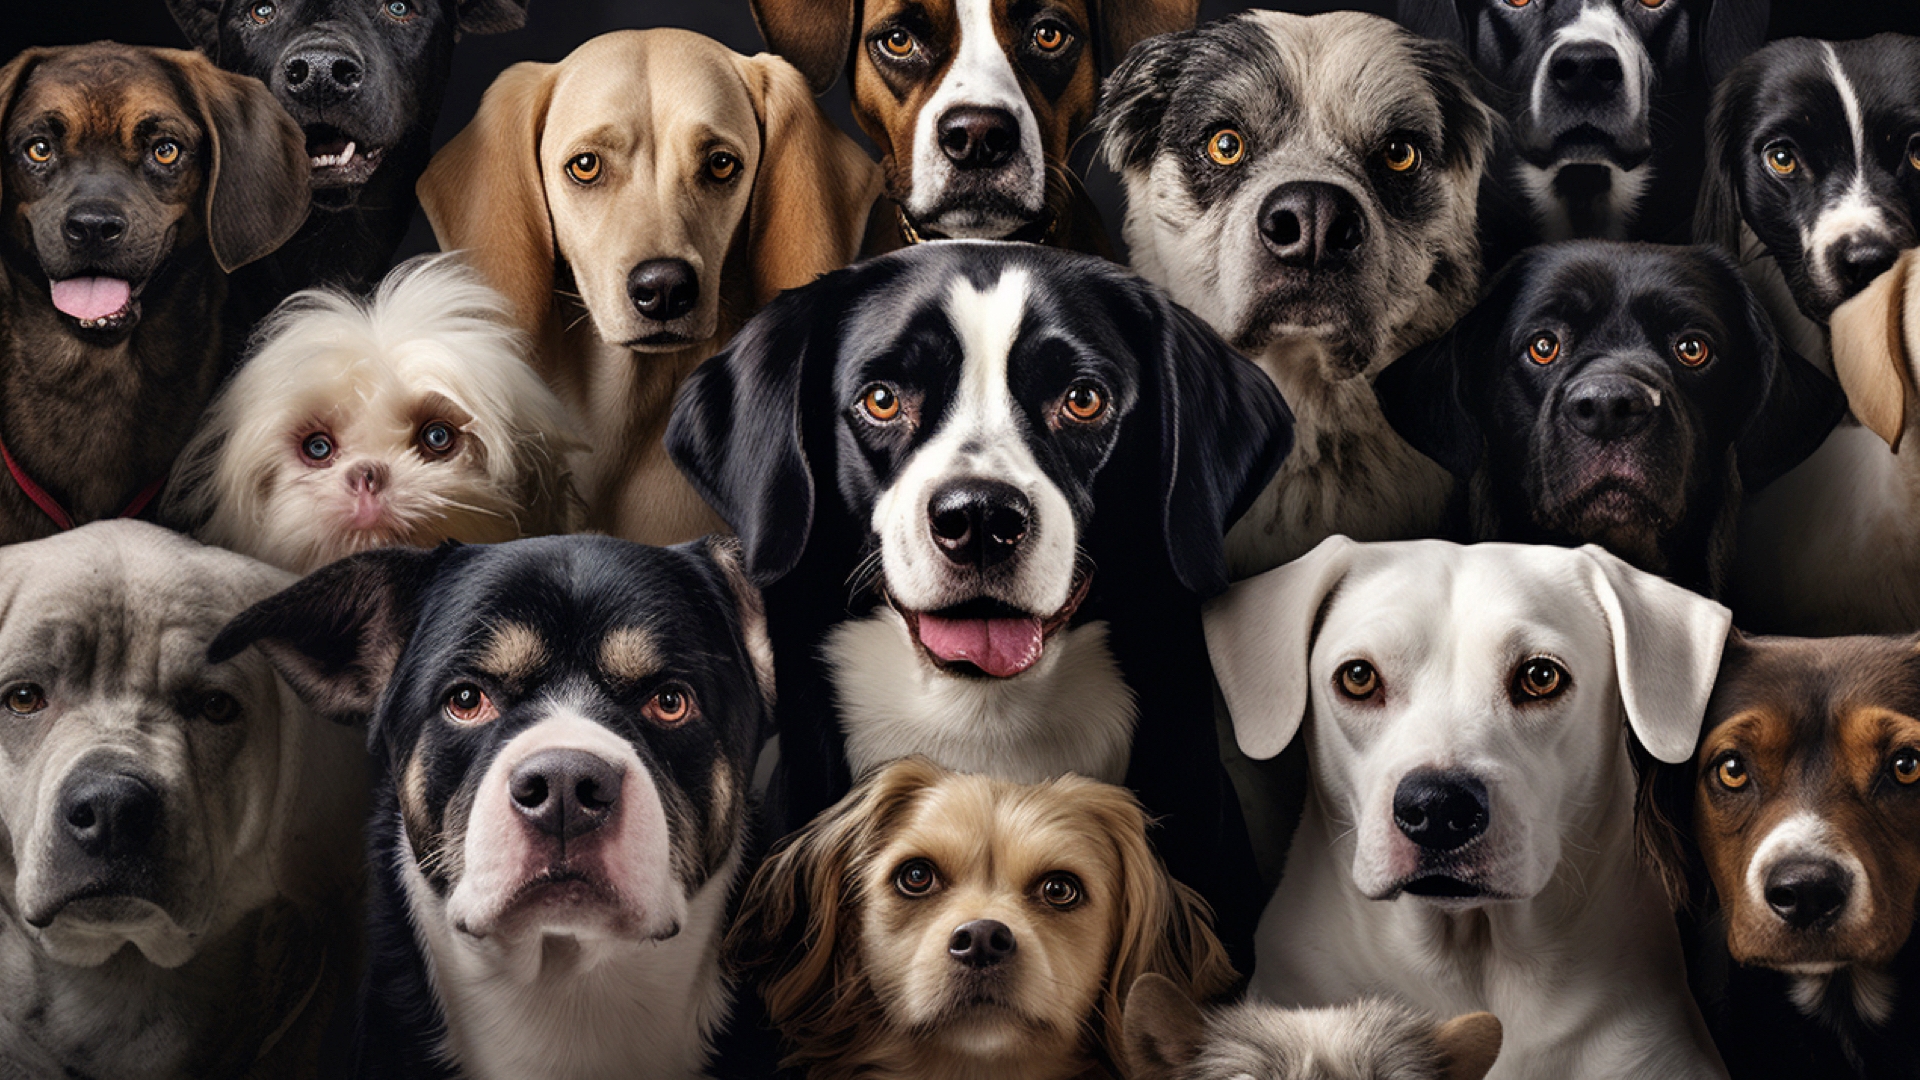 The Canine Connection, How Dogs Understand Human Emotions